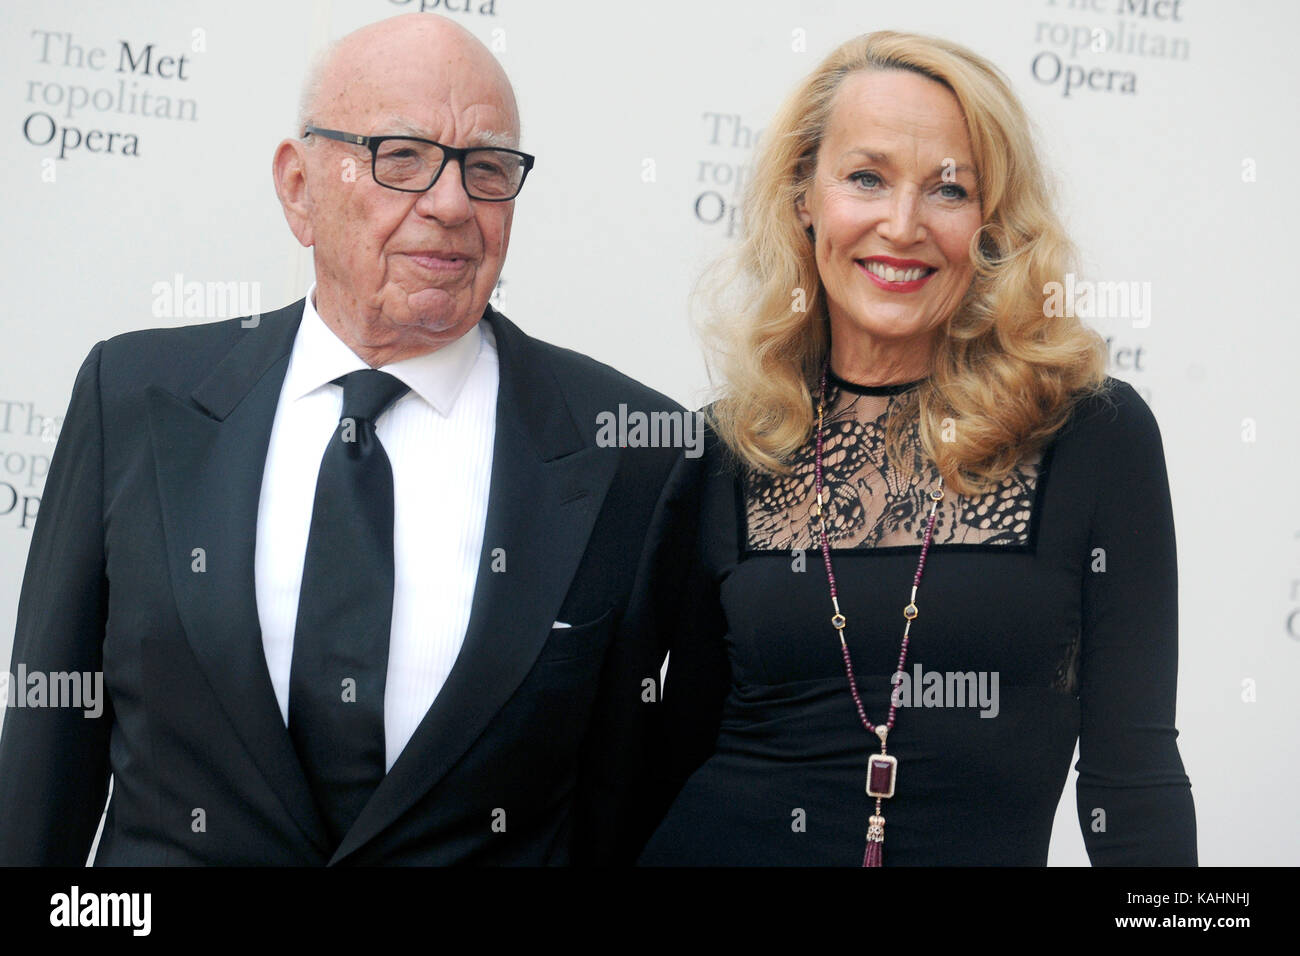 Rupert Murdoch and Jerry Hall attend the 2017 Metropolitan Opera Opening Night at The Metropolitan Opera House on September 25, 2017 in New York City. Stock Photo